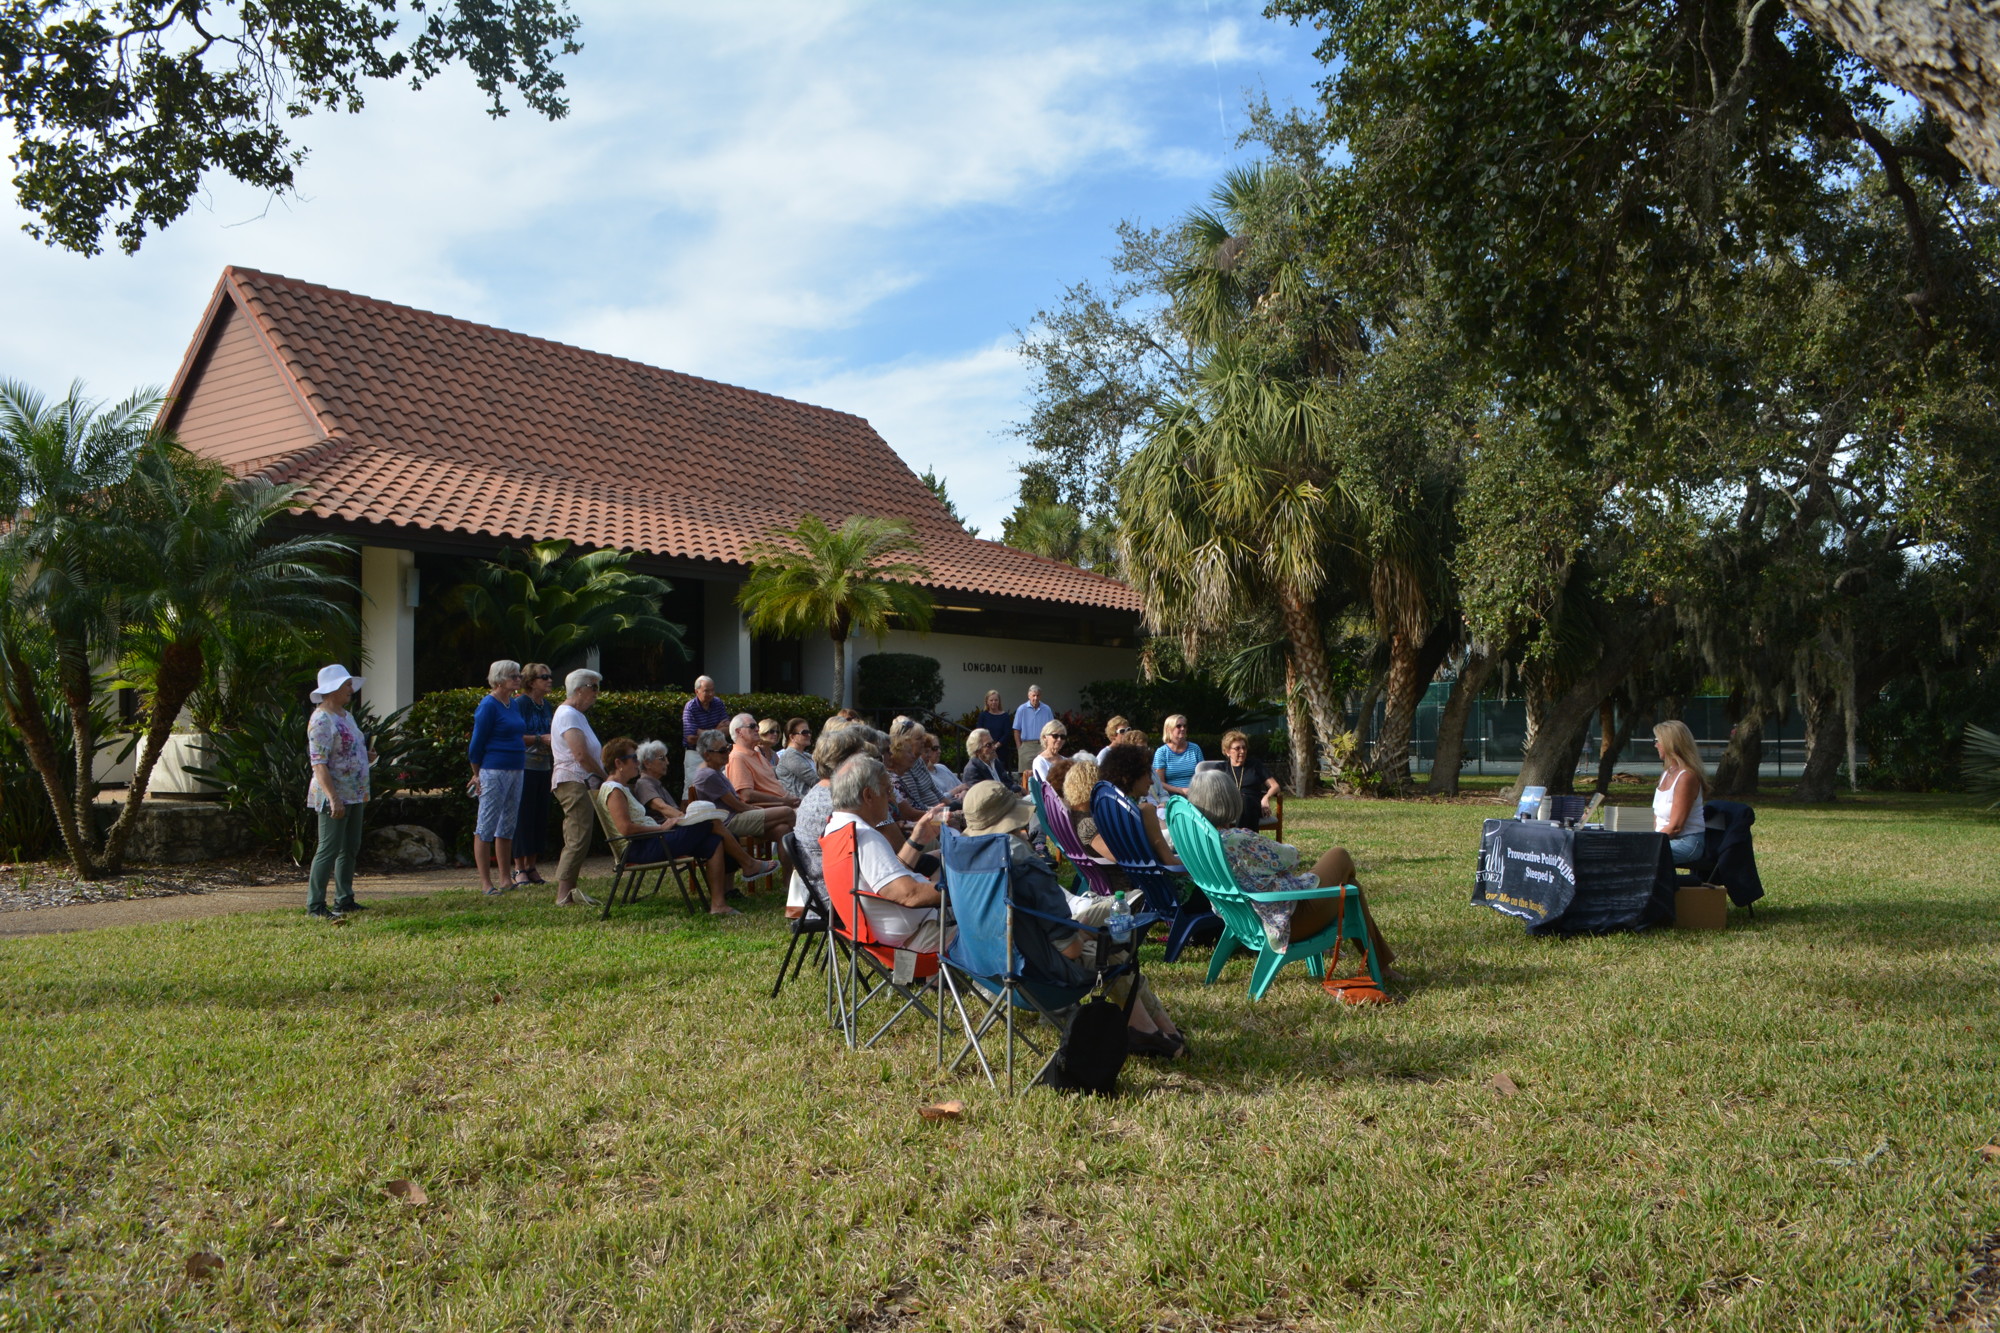 Attendees listen to Sally Fernandez as she speaks at a book signing Sunday on the lawn of Longboat Library.